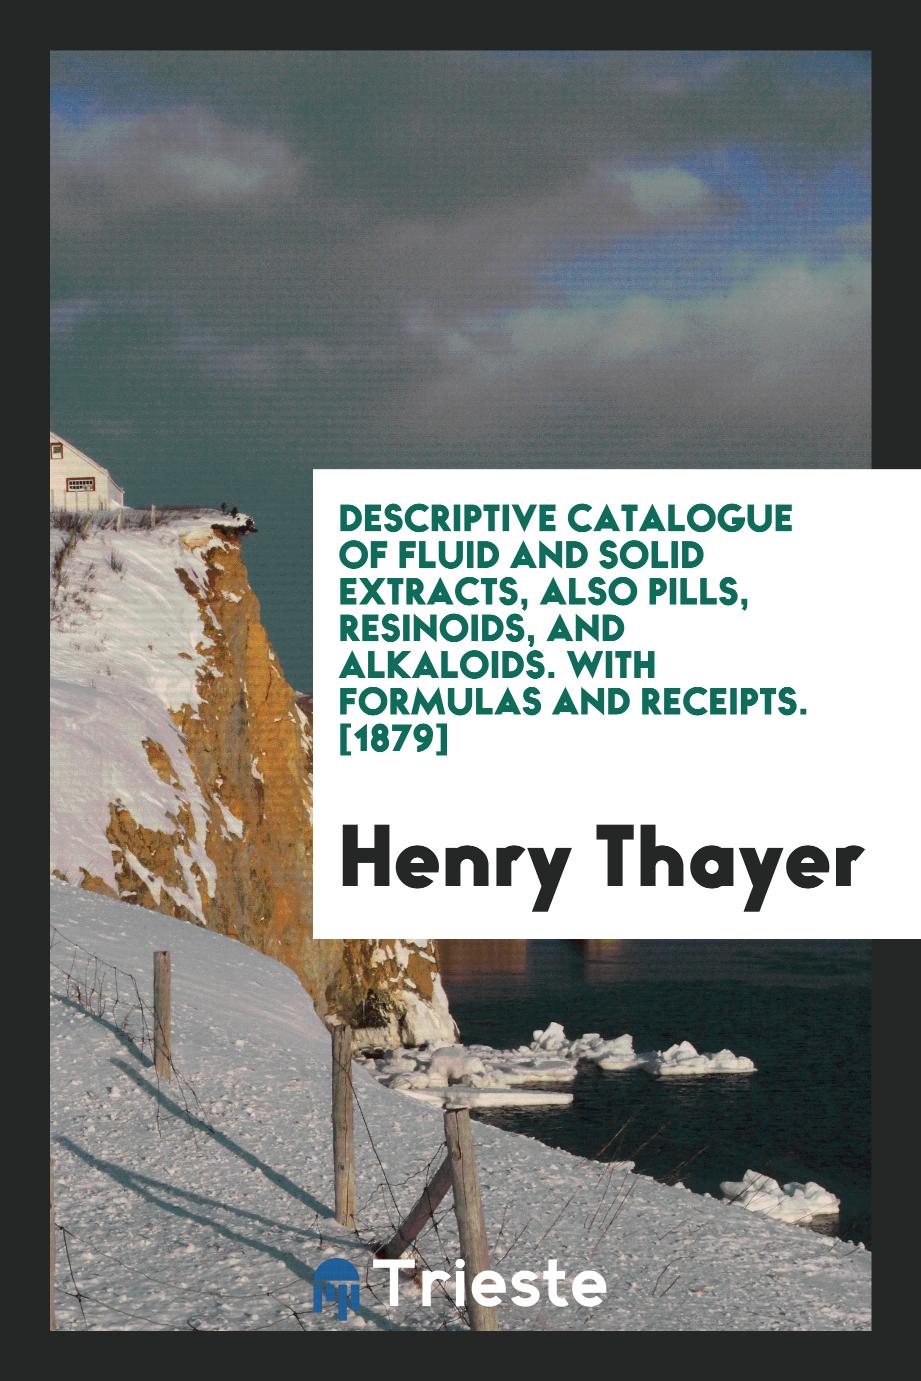 Henry Thayer - Descriptive Catalogue of Fluid and Solid Extracts, Also Pills, Resinoids, and Alkaloids. With Formulas and Receipts. [1879]